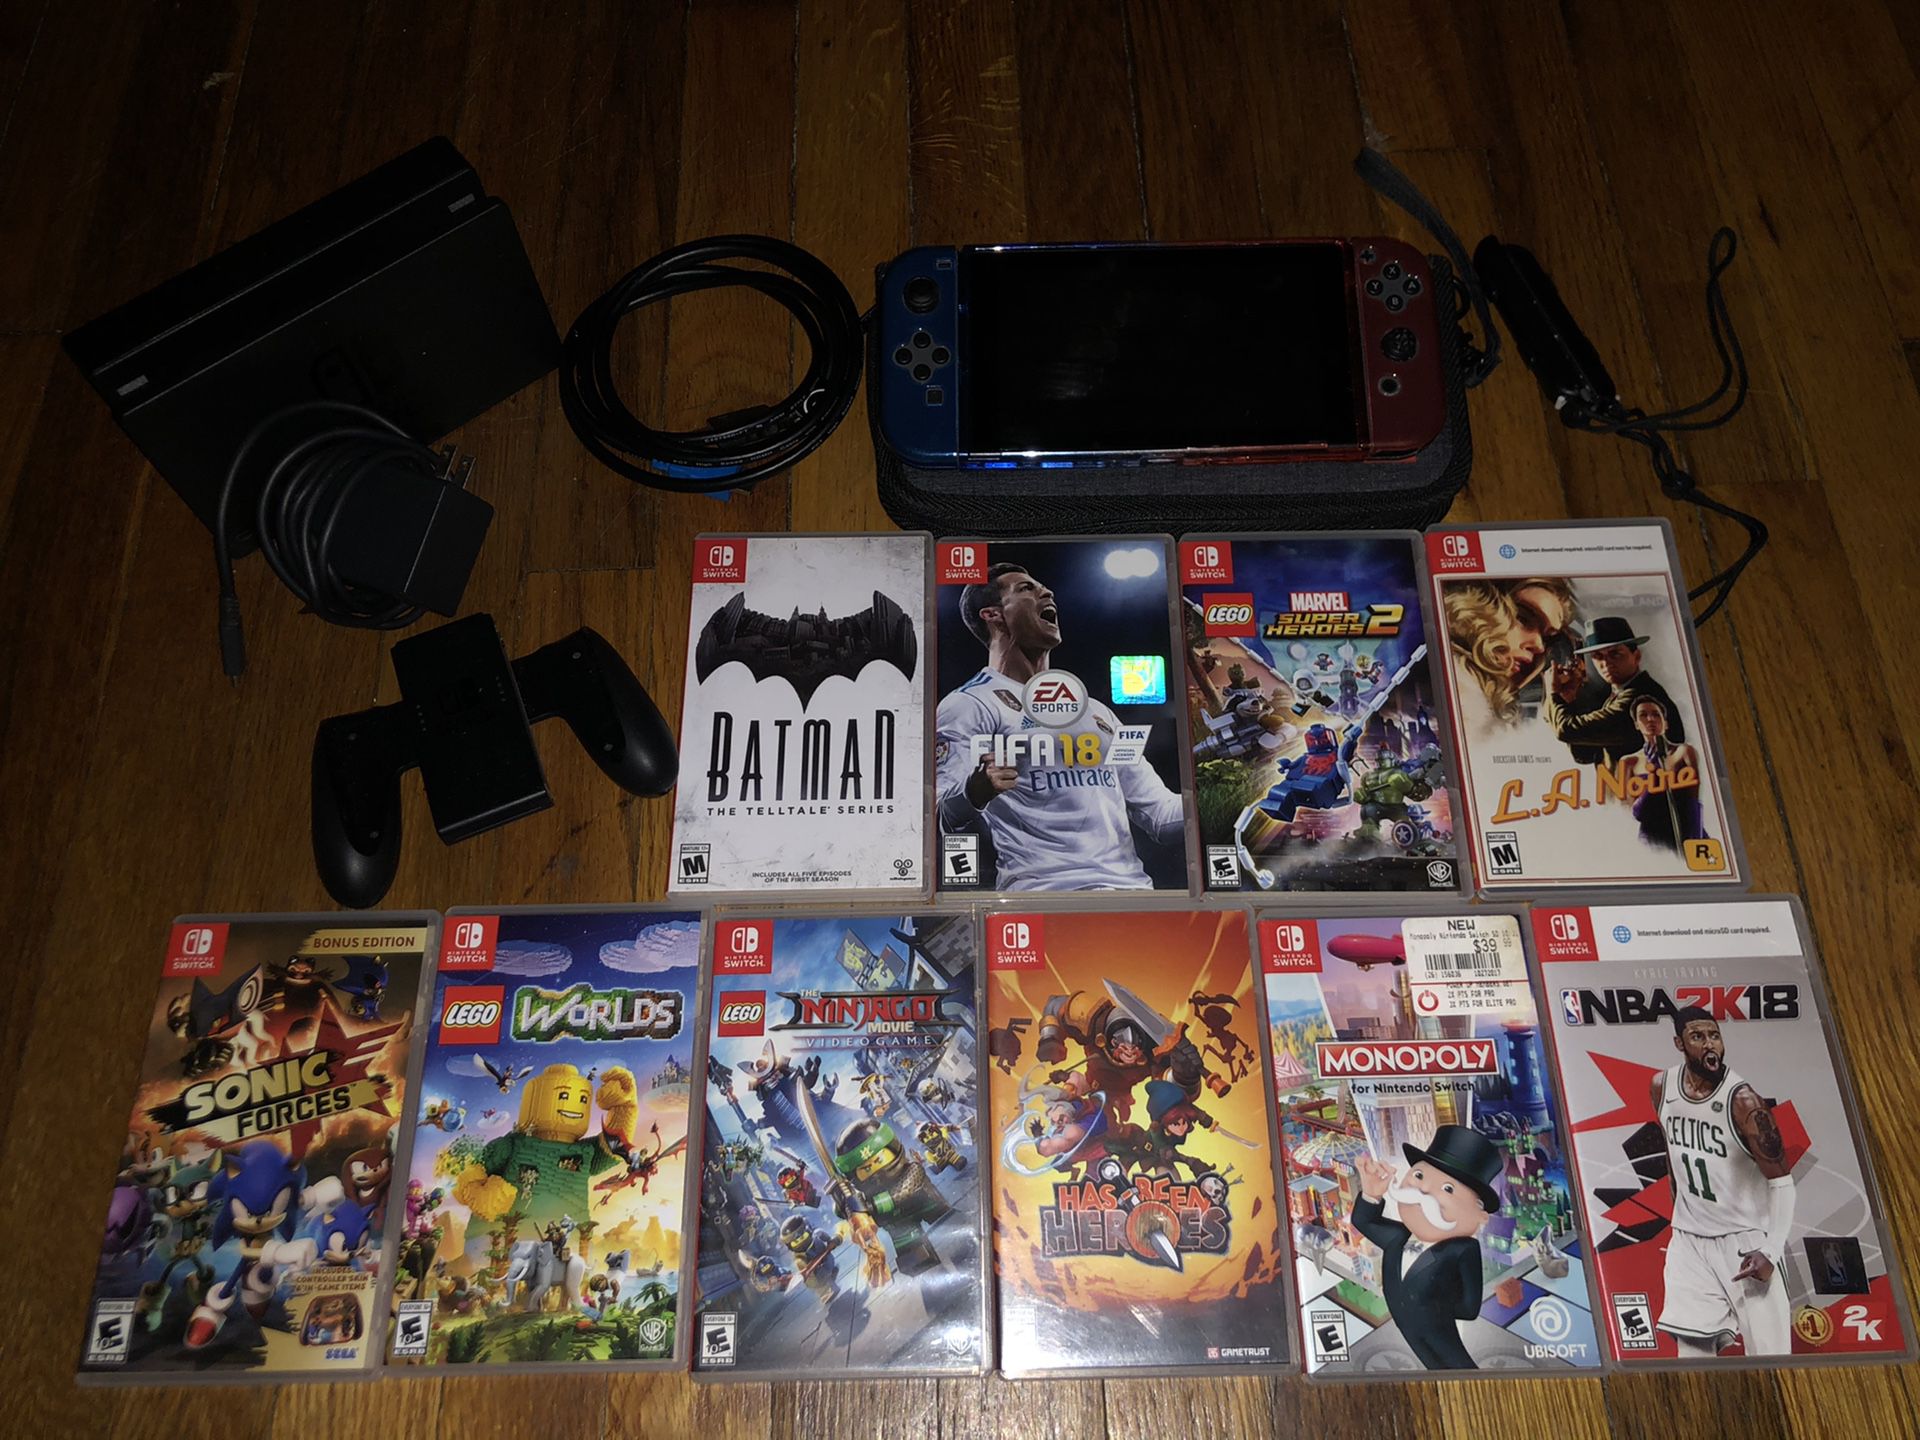 Nintendo switch with 10 games plus 2-3 digital games